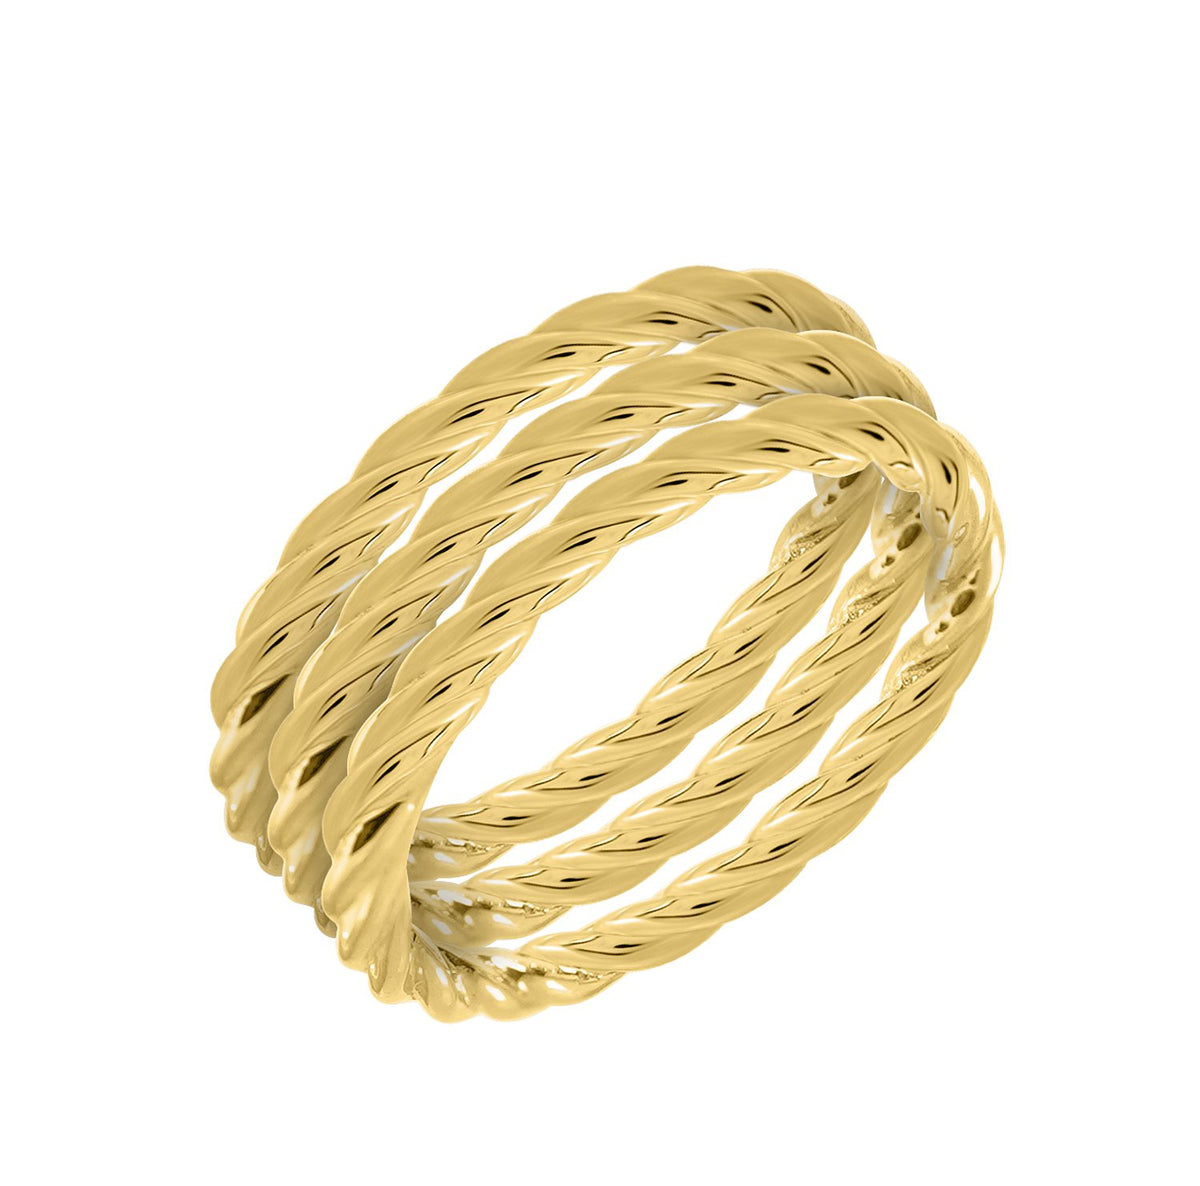 GEMOUR 14K Yellow Gold Clad Sterling Silver Twisted Rope Stackable Ring